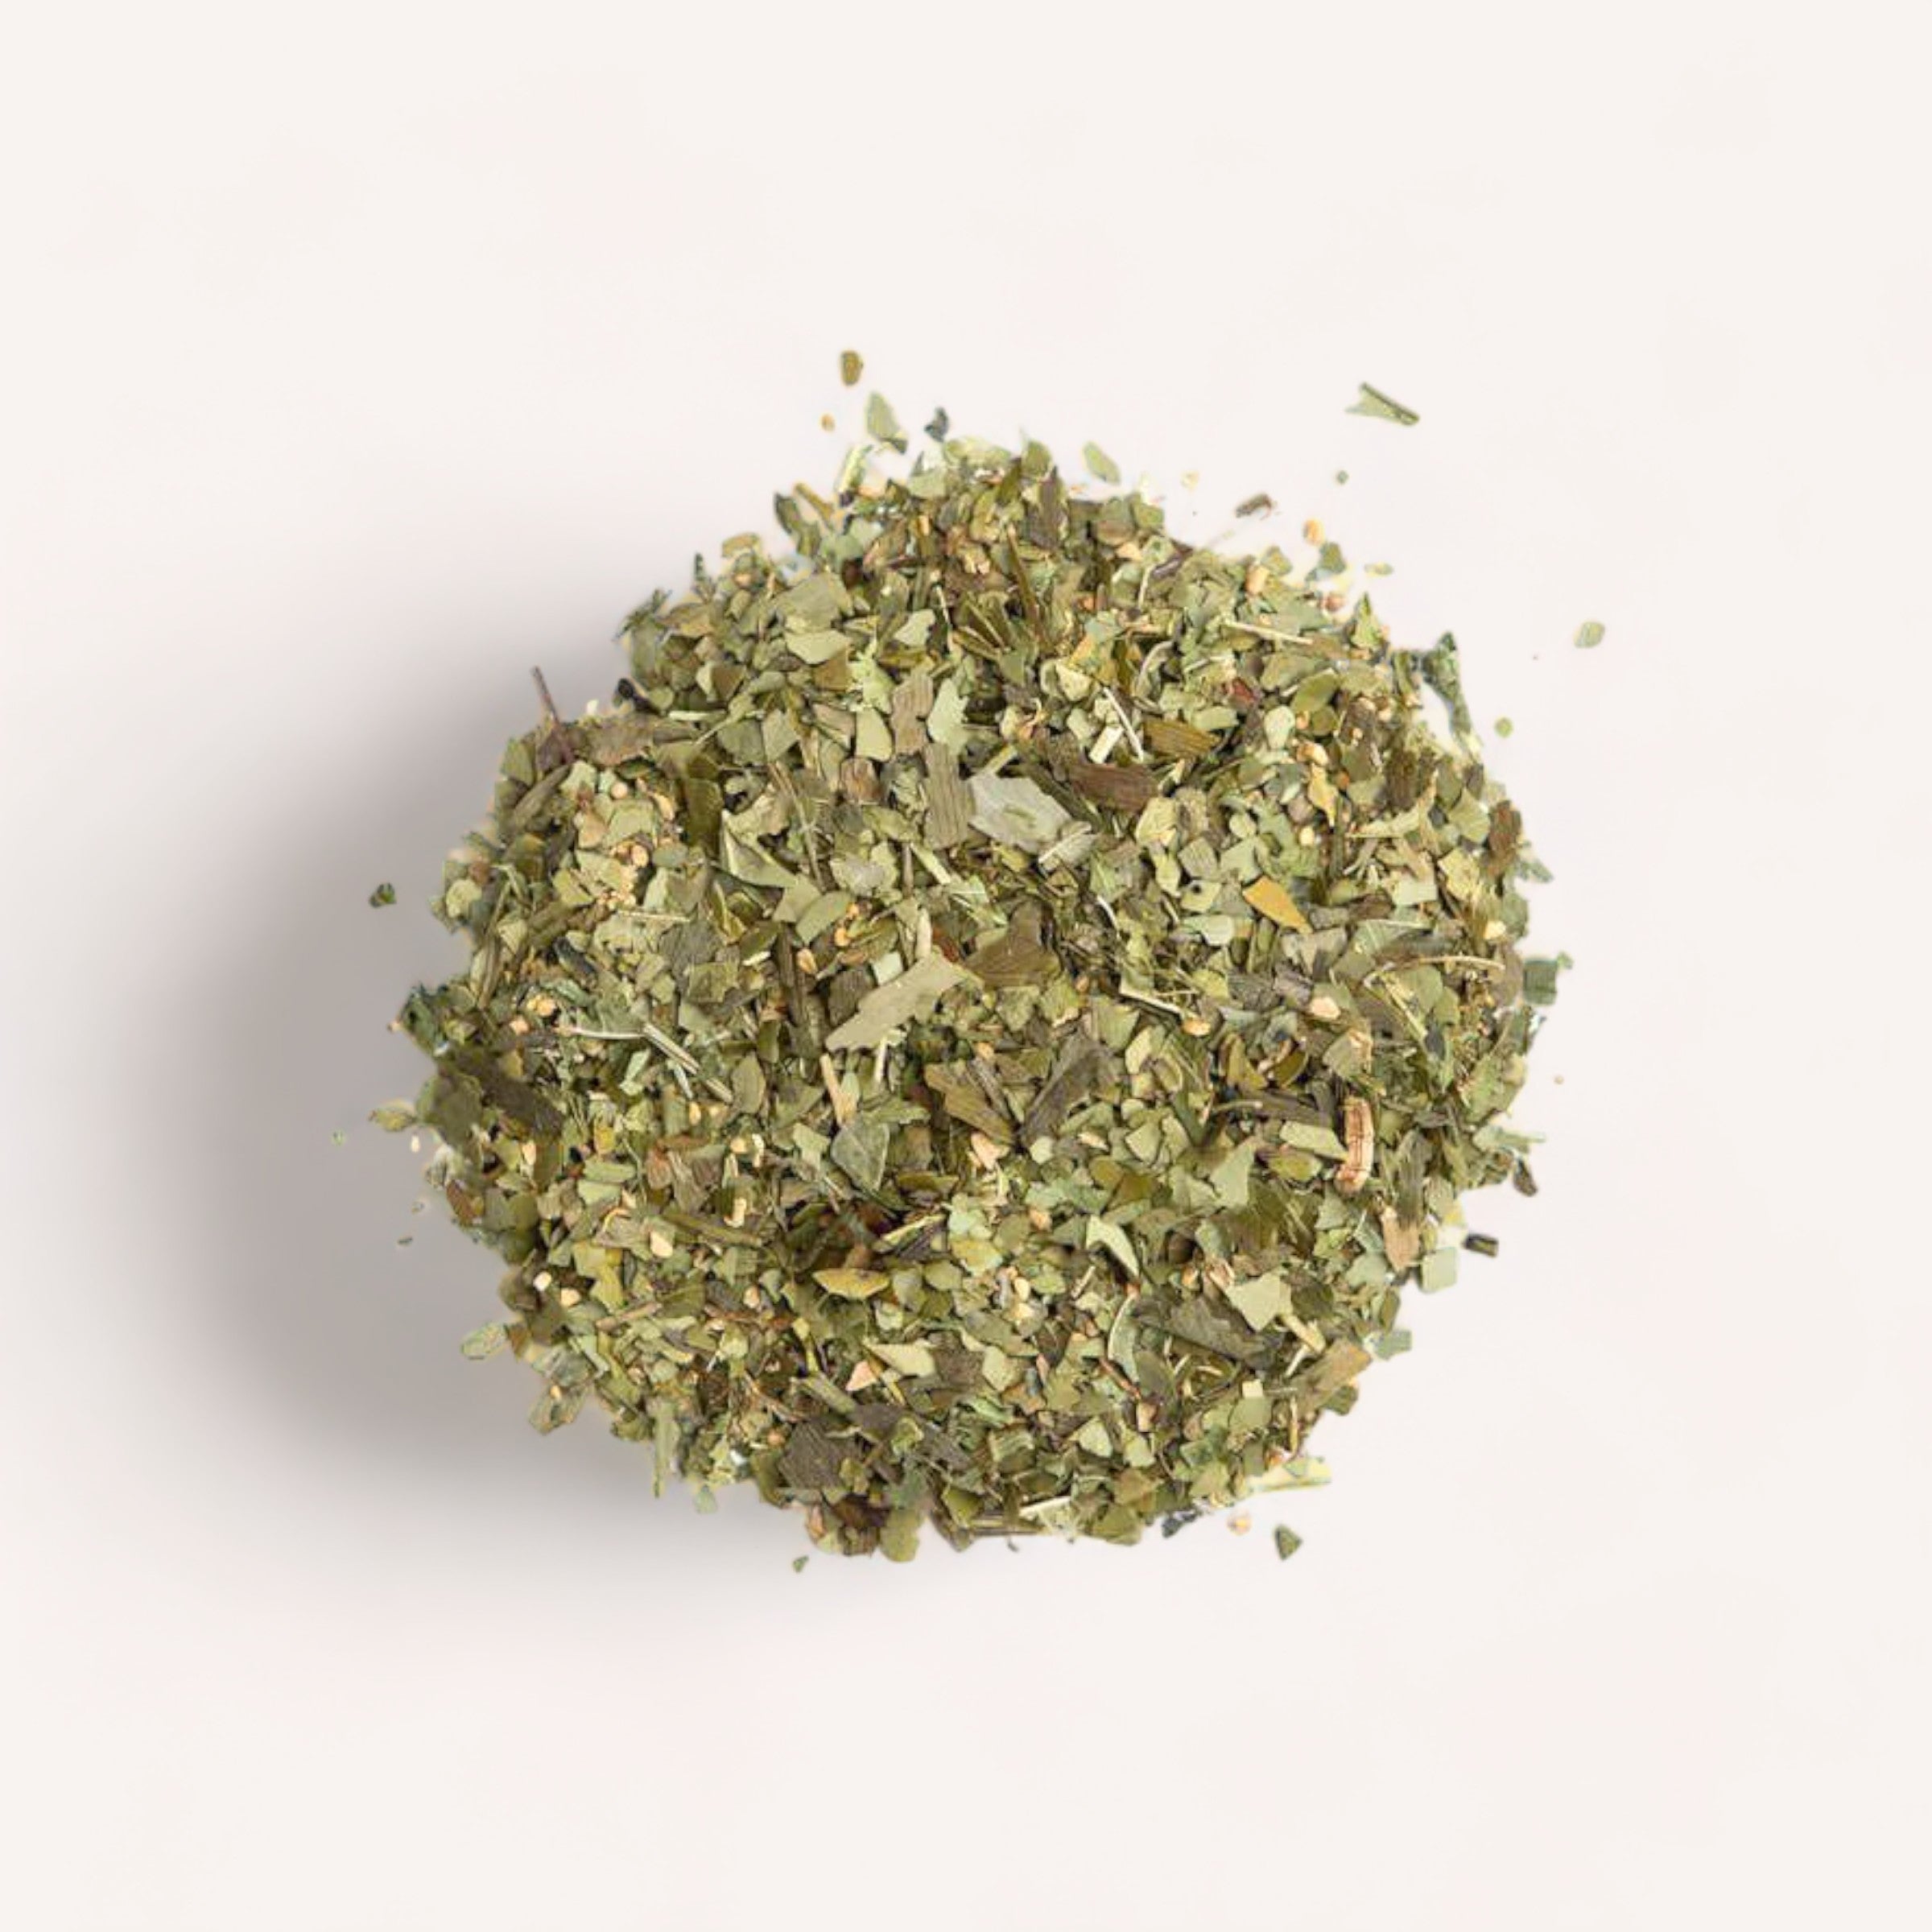 A pile of dried Clarify Tea herbs by Forage + Bloom against a white background.